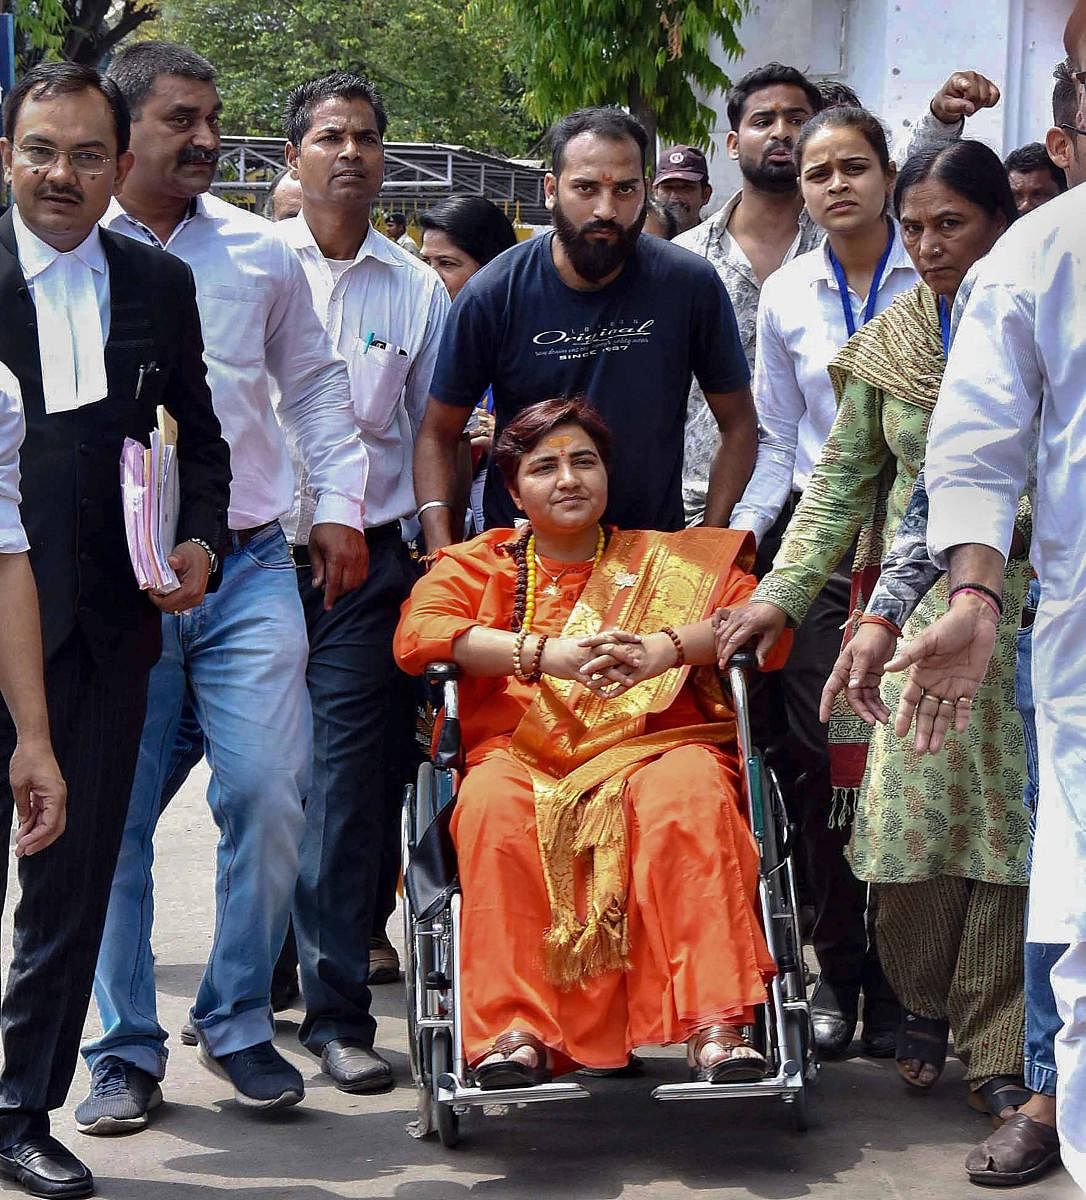 BJP candidate for Bhopal Lok Sabha constituency Sadhvi Pragya Singh Thakur arrives at district collectorate office to collect nomination papers, in Bhopal on April 22, 2019. PTI